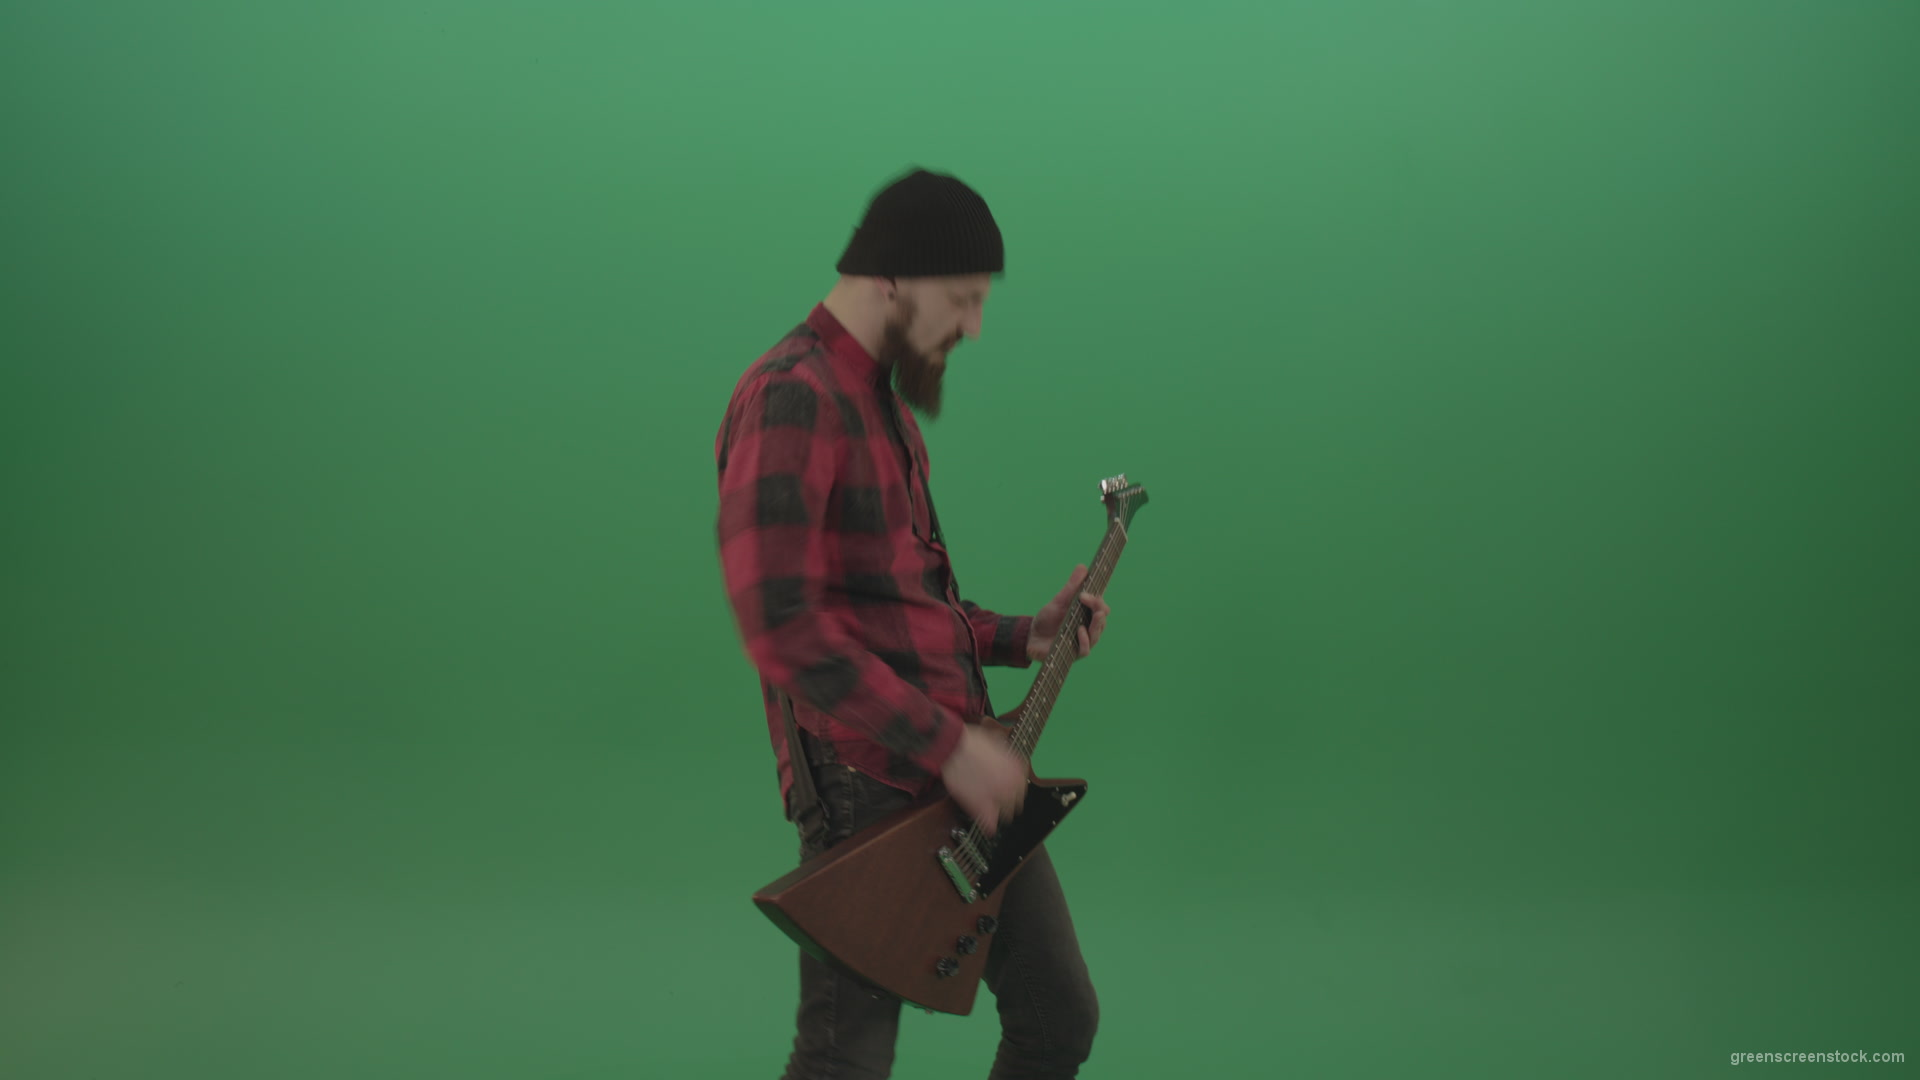 Young-man-with-beard-play-hardcore-music-on-guitar-in-side-view-on-green-screen-chromakey-background_002 Green Screen Stock